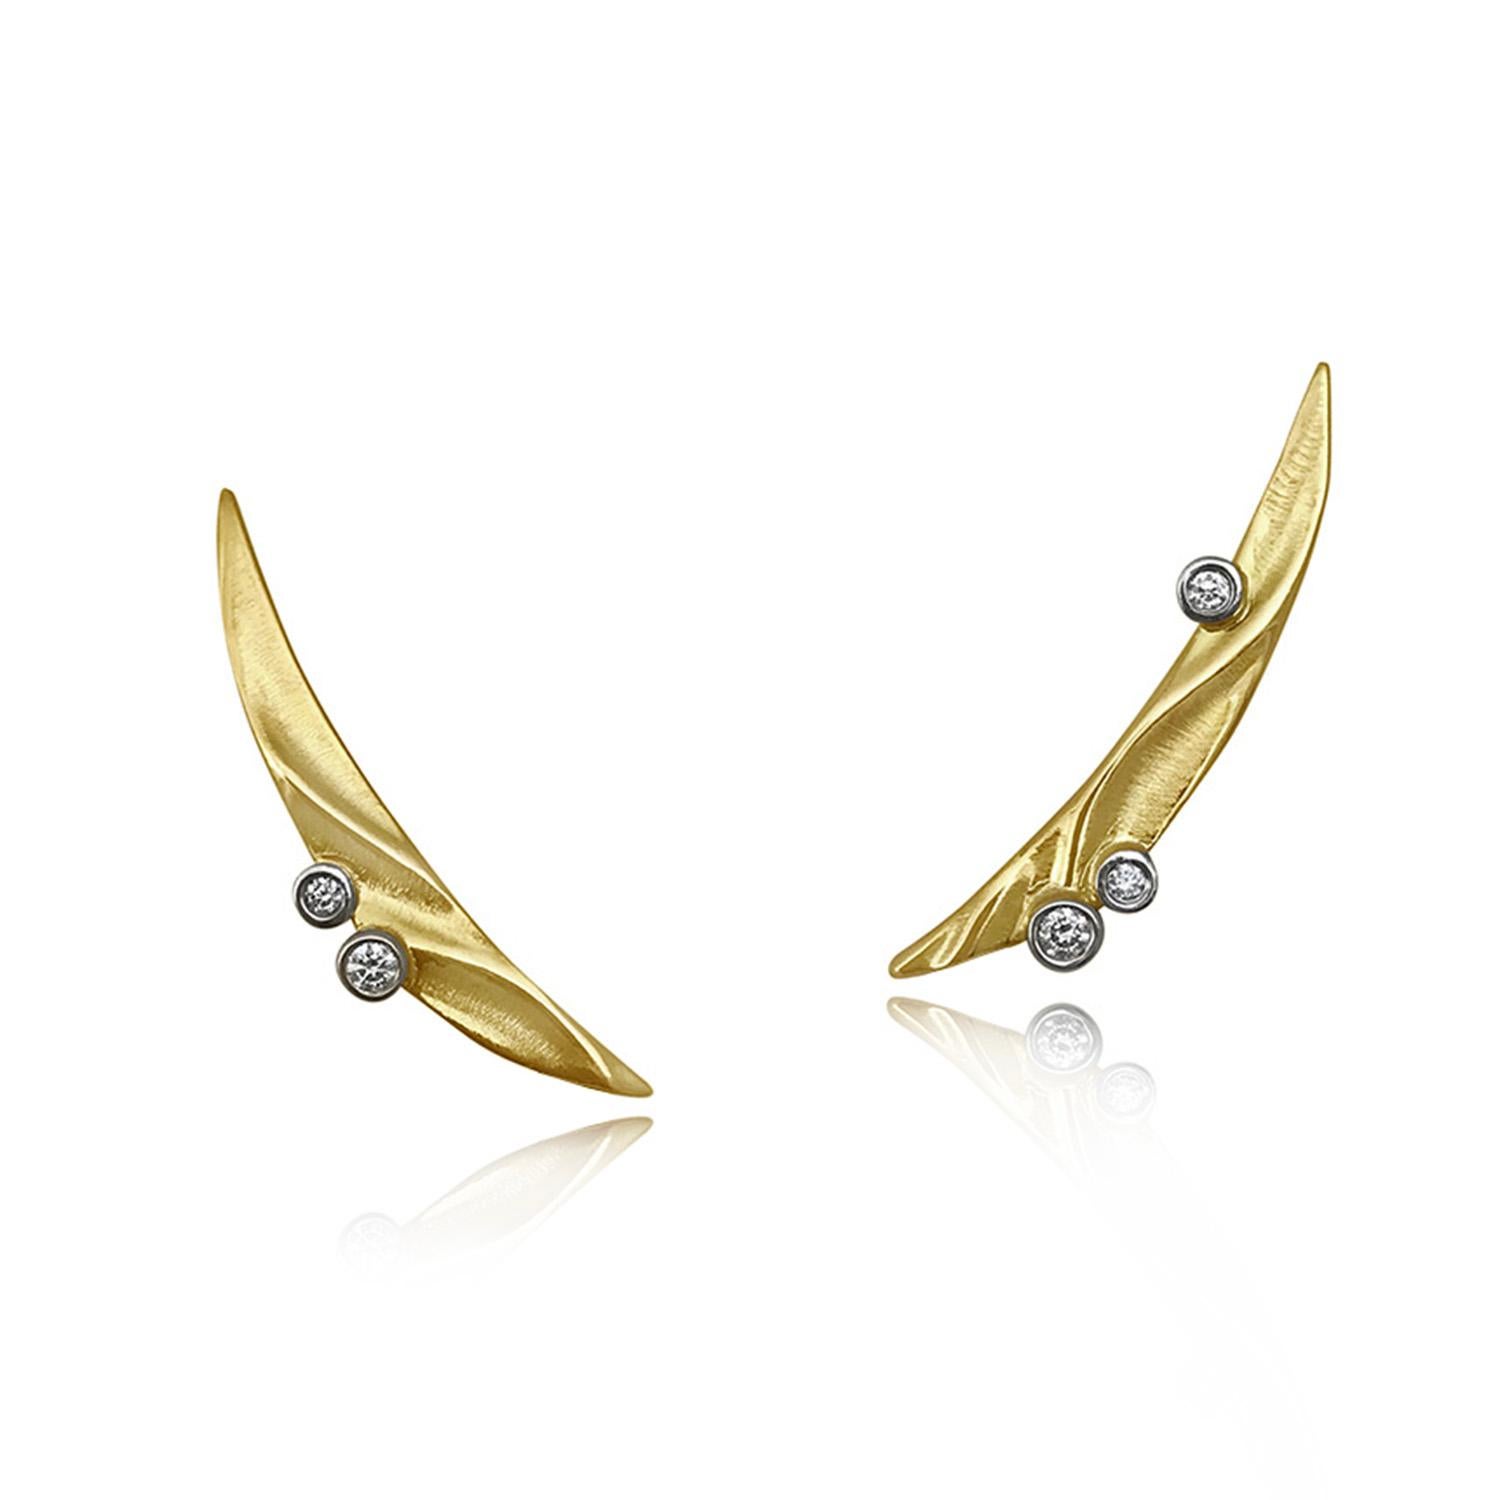 K.Mita's Moon River Climber Earrings are made from 14 Karat Yellow Gold and Sapphire Briolettes with 0.09 Carat Diamonds (total weight) set in 14 Karat White Gold. The Climber Earrings may be worn on their own, either climing up the earlobe or